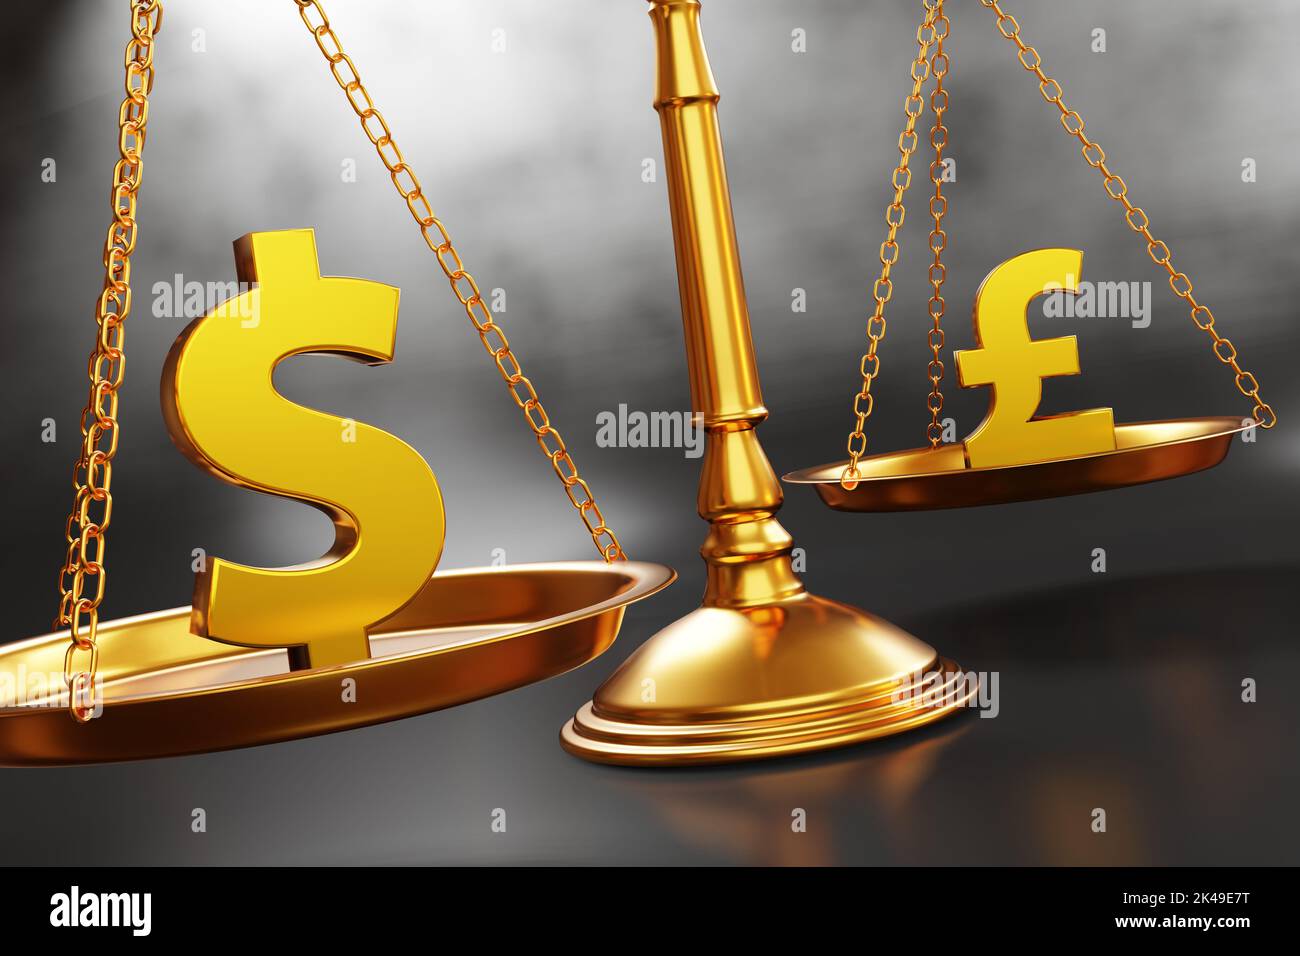 US dollar and British pound sign symbol on a golden weight balance. Strong US dollar and weak UK sterling, and their exchange rate is close to 1 to 1 Stock Photo